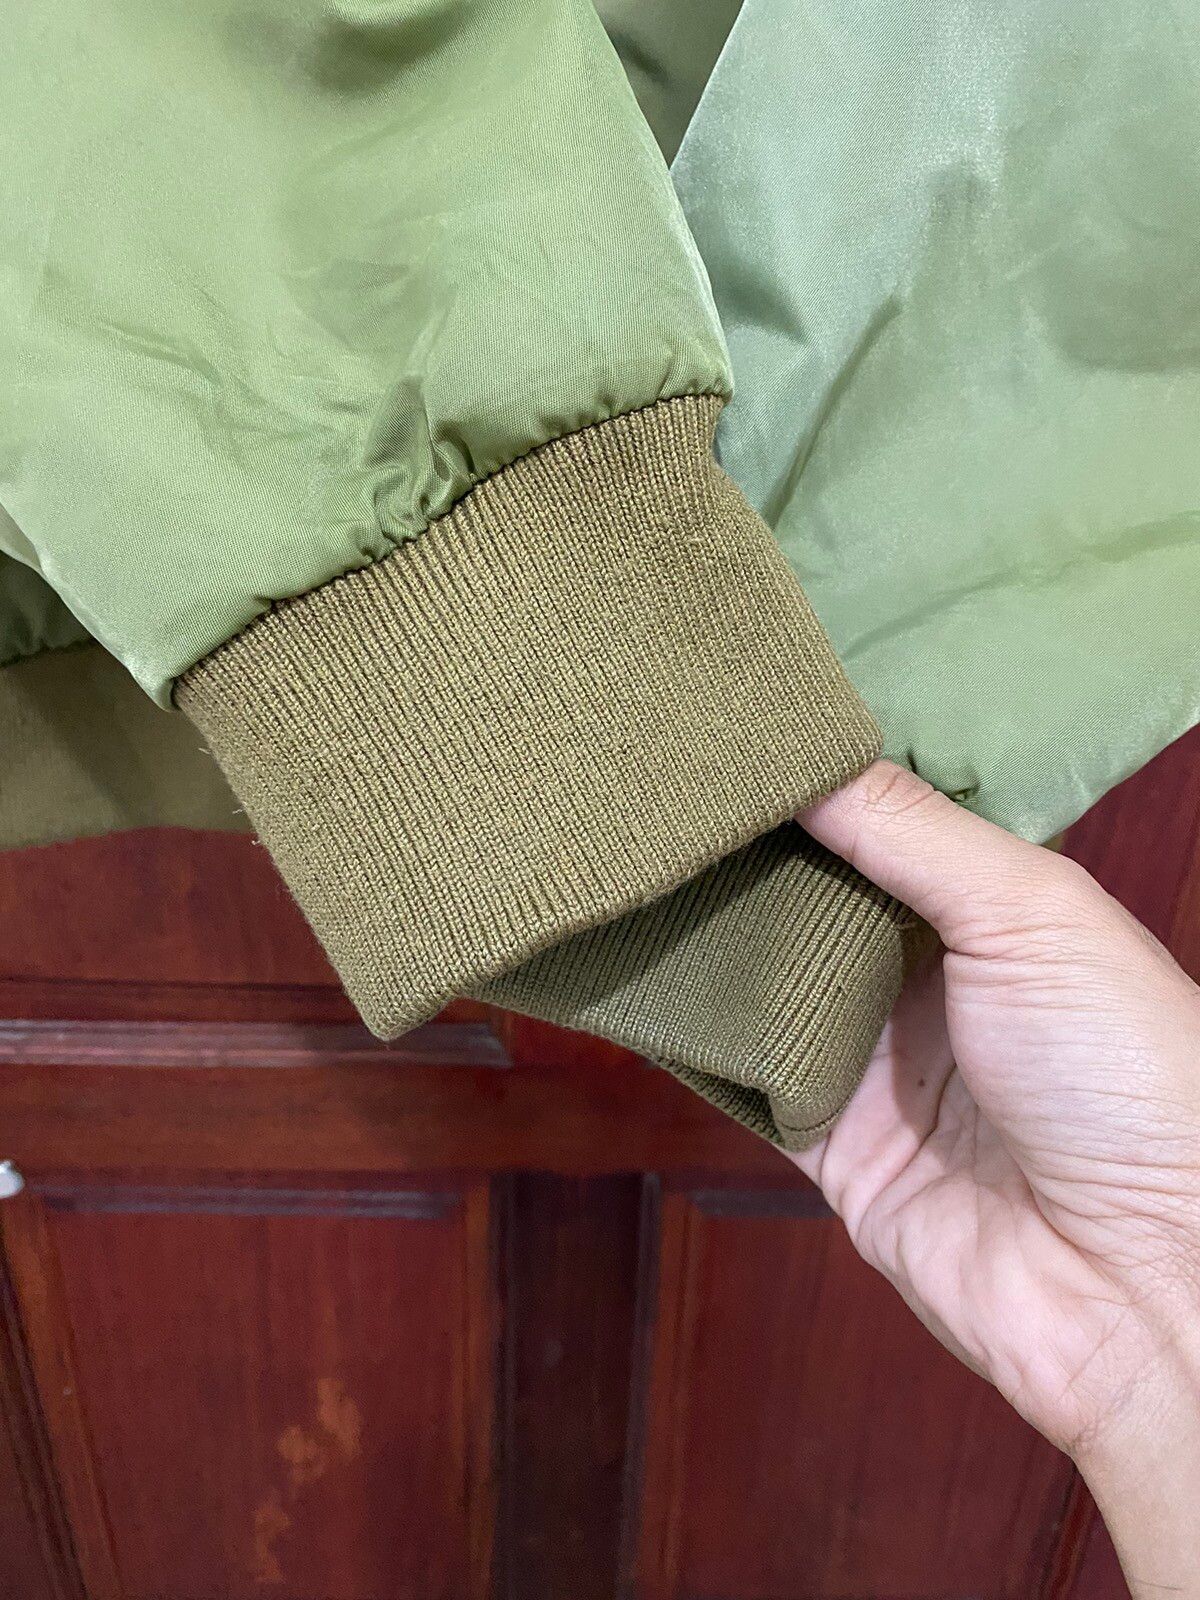 The North Face Ma-1 Jacket Design Military Olive Green - 4